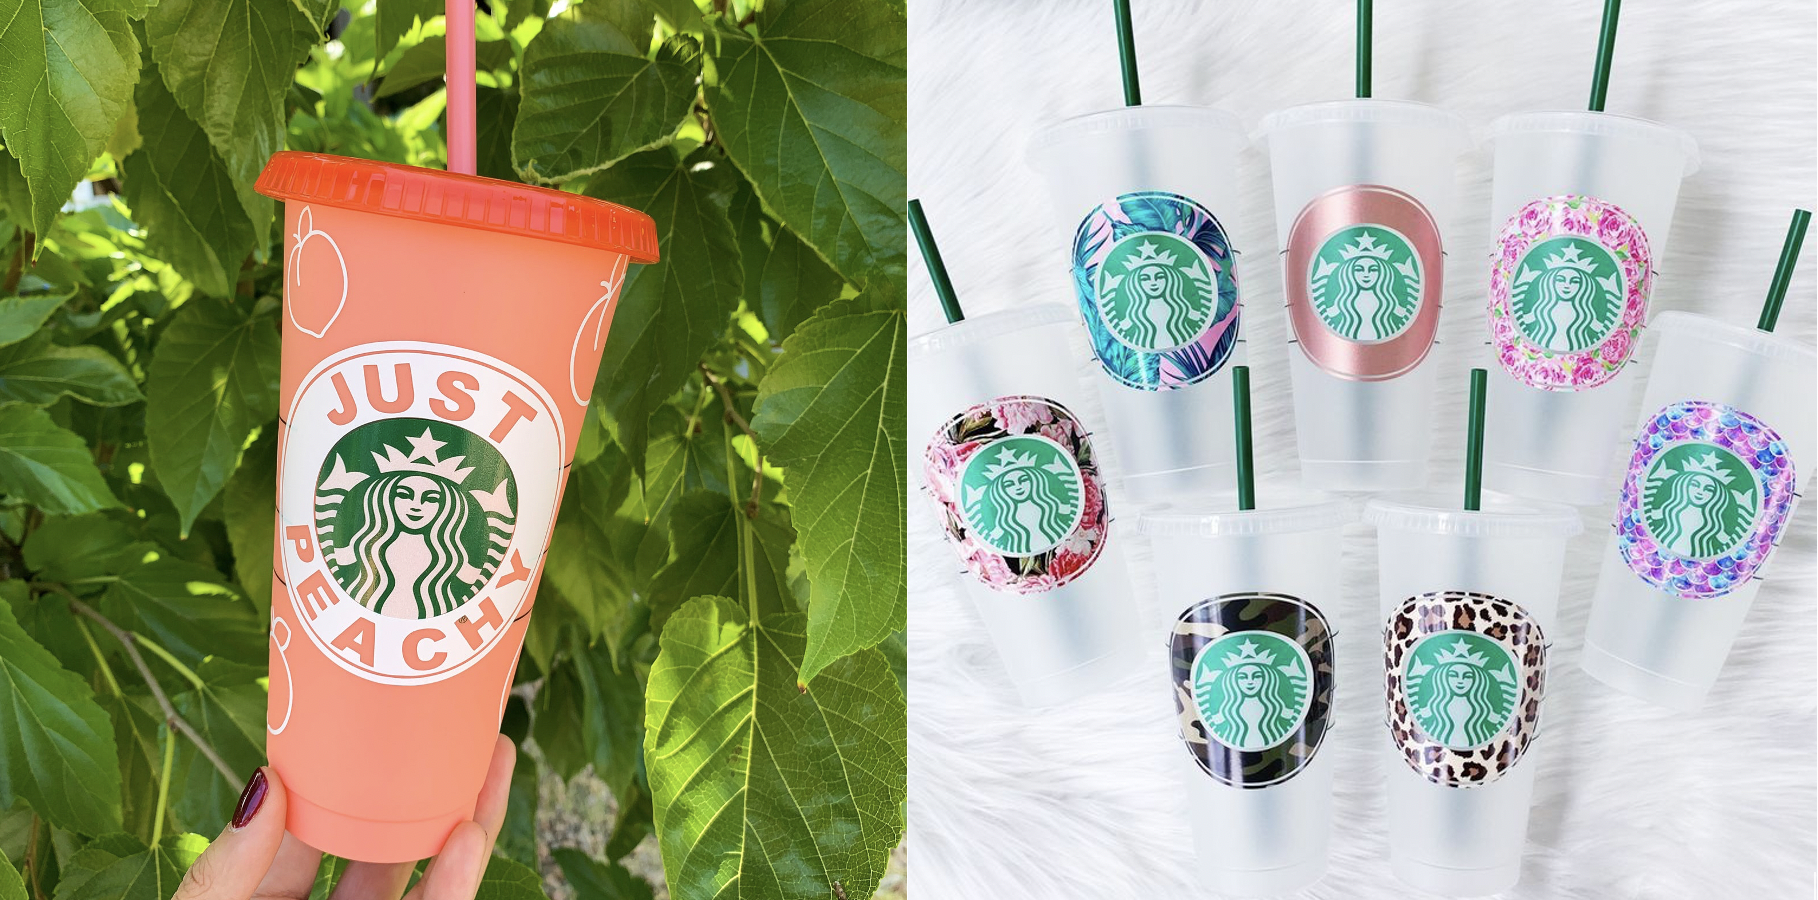 DIY Customized Starbucks Cups - Personalize With a Name